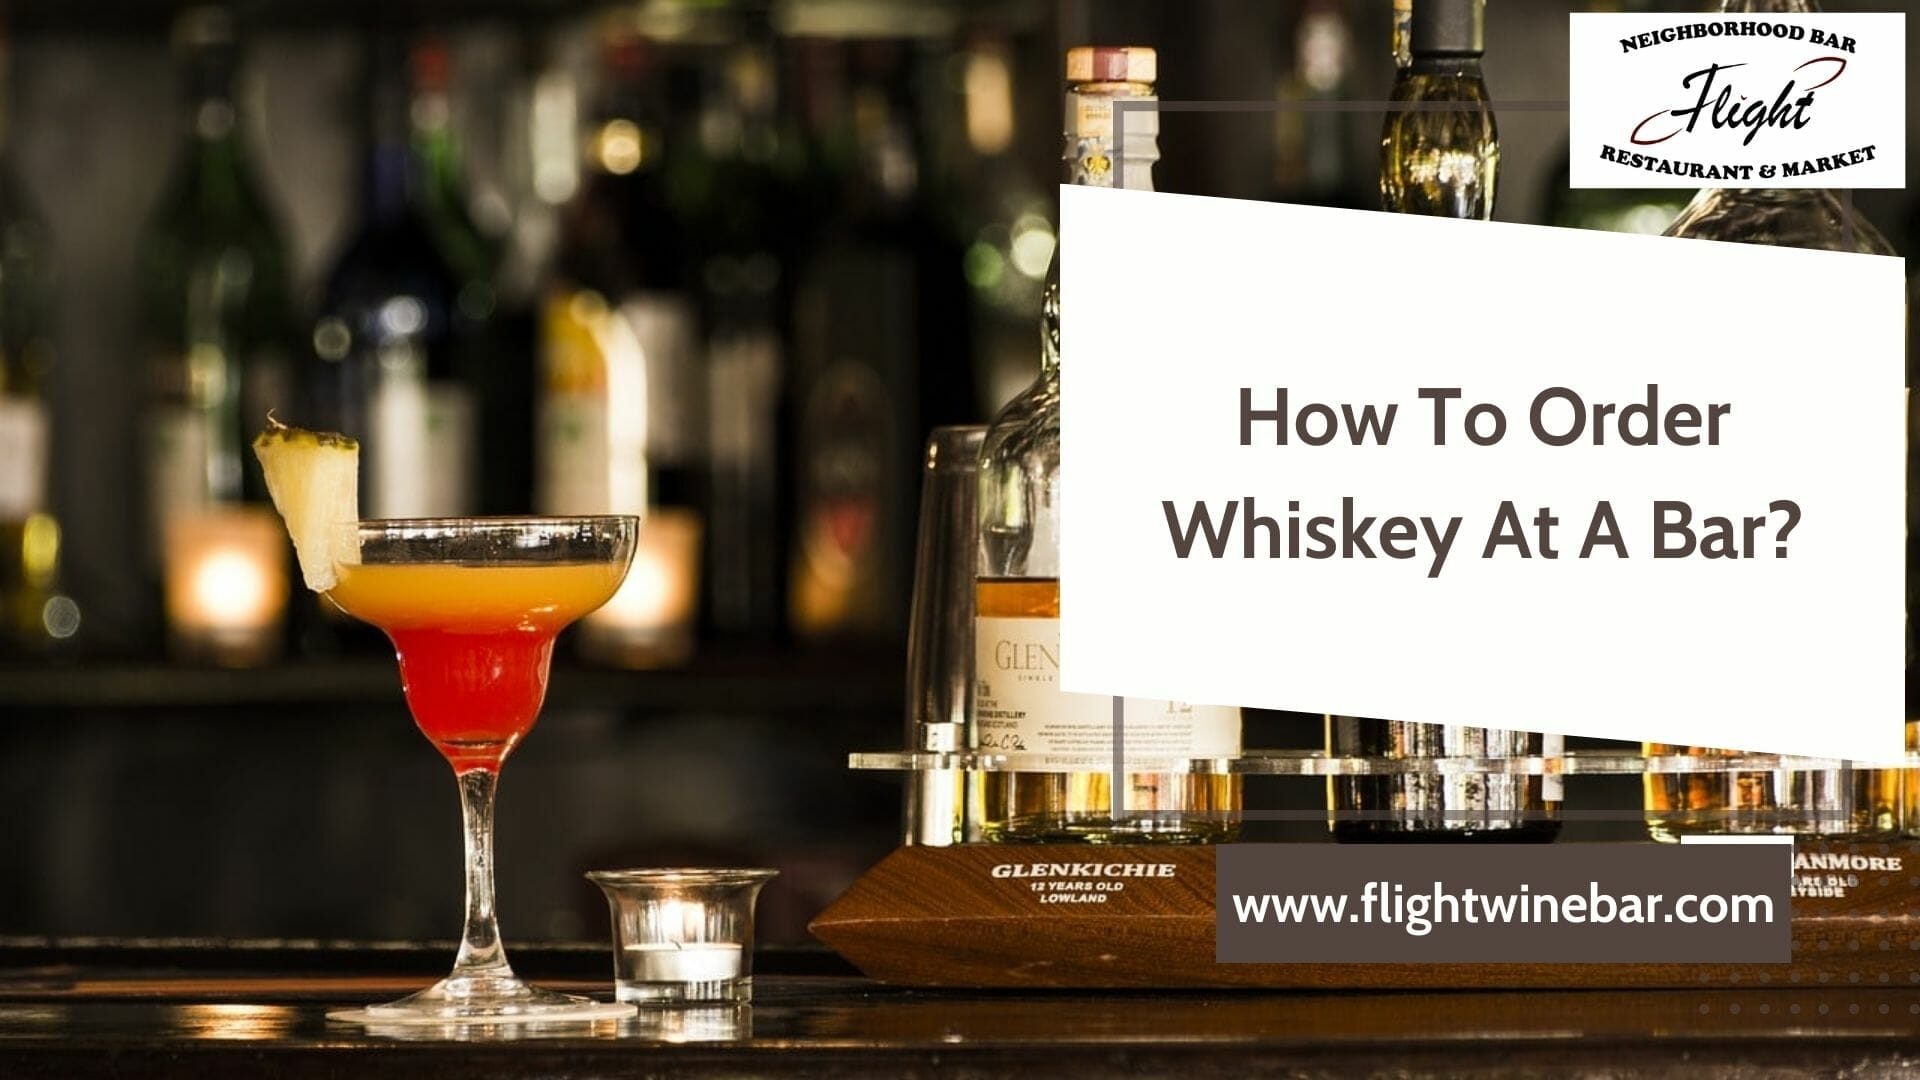 How To Order Whiskey At A Bar